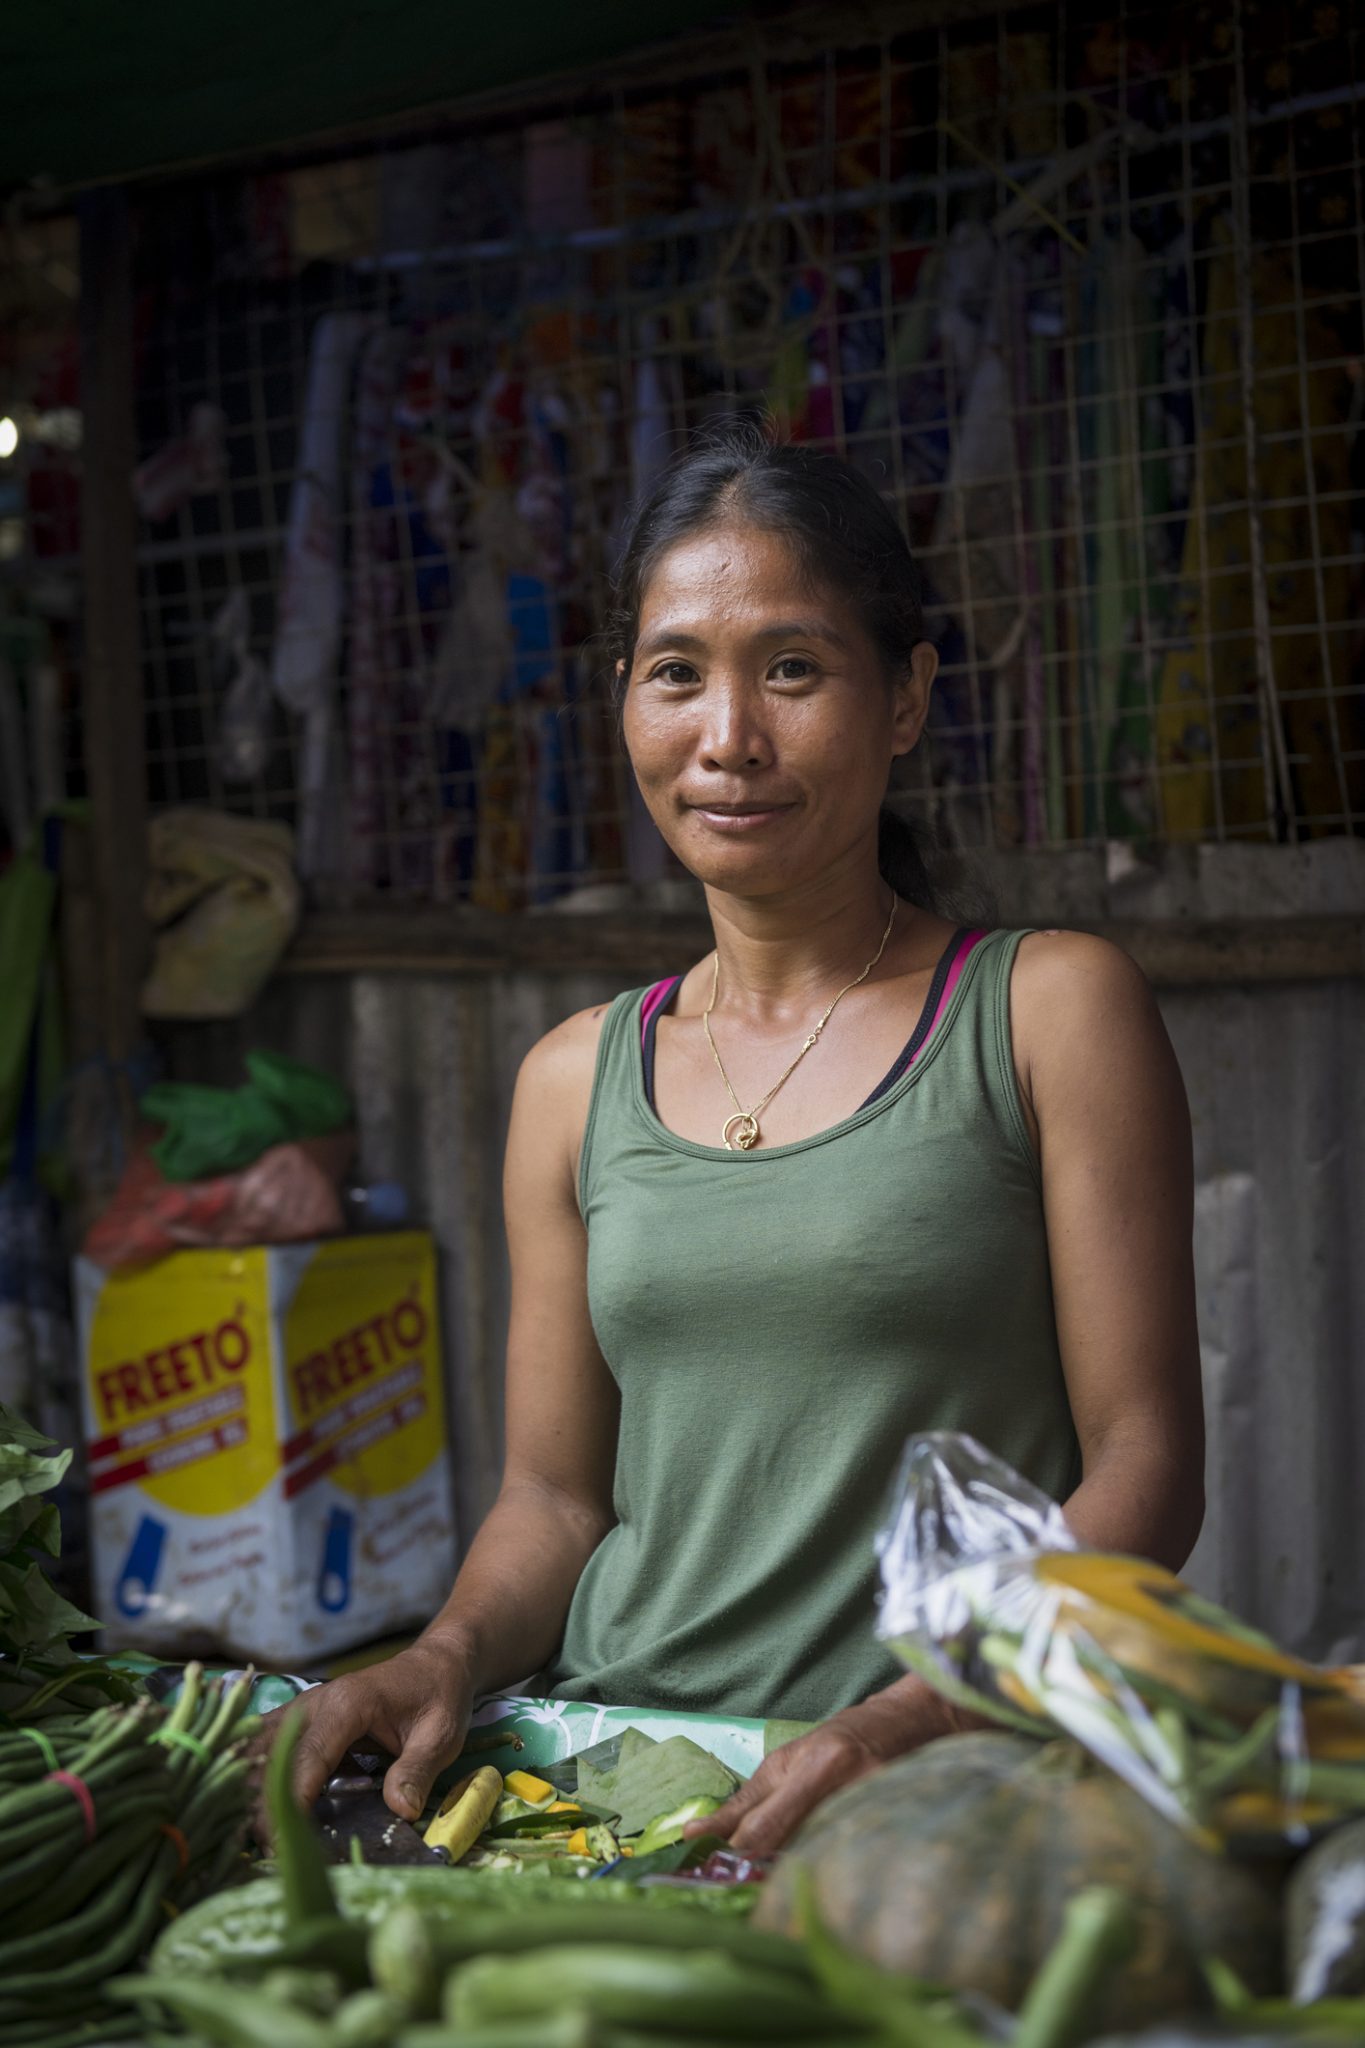 A Filipino market vendor looks up with a friendly smile while selling vegetables at the main market in Puerto Princesa, Palawan, Philippines. (July 3, 2019)